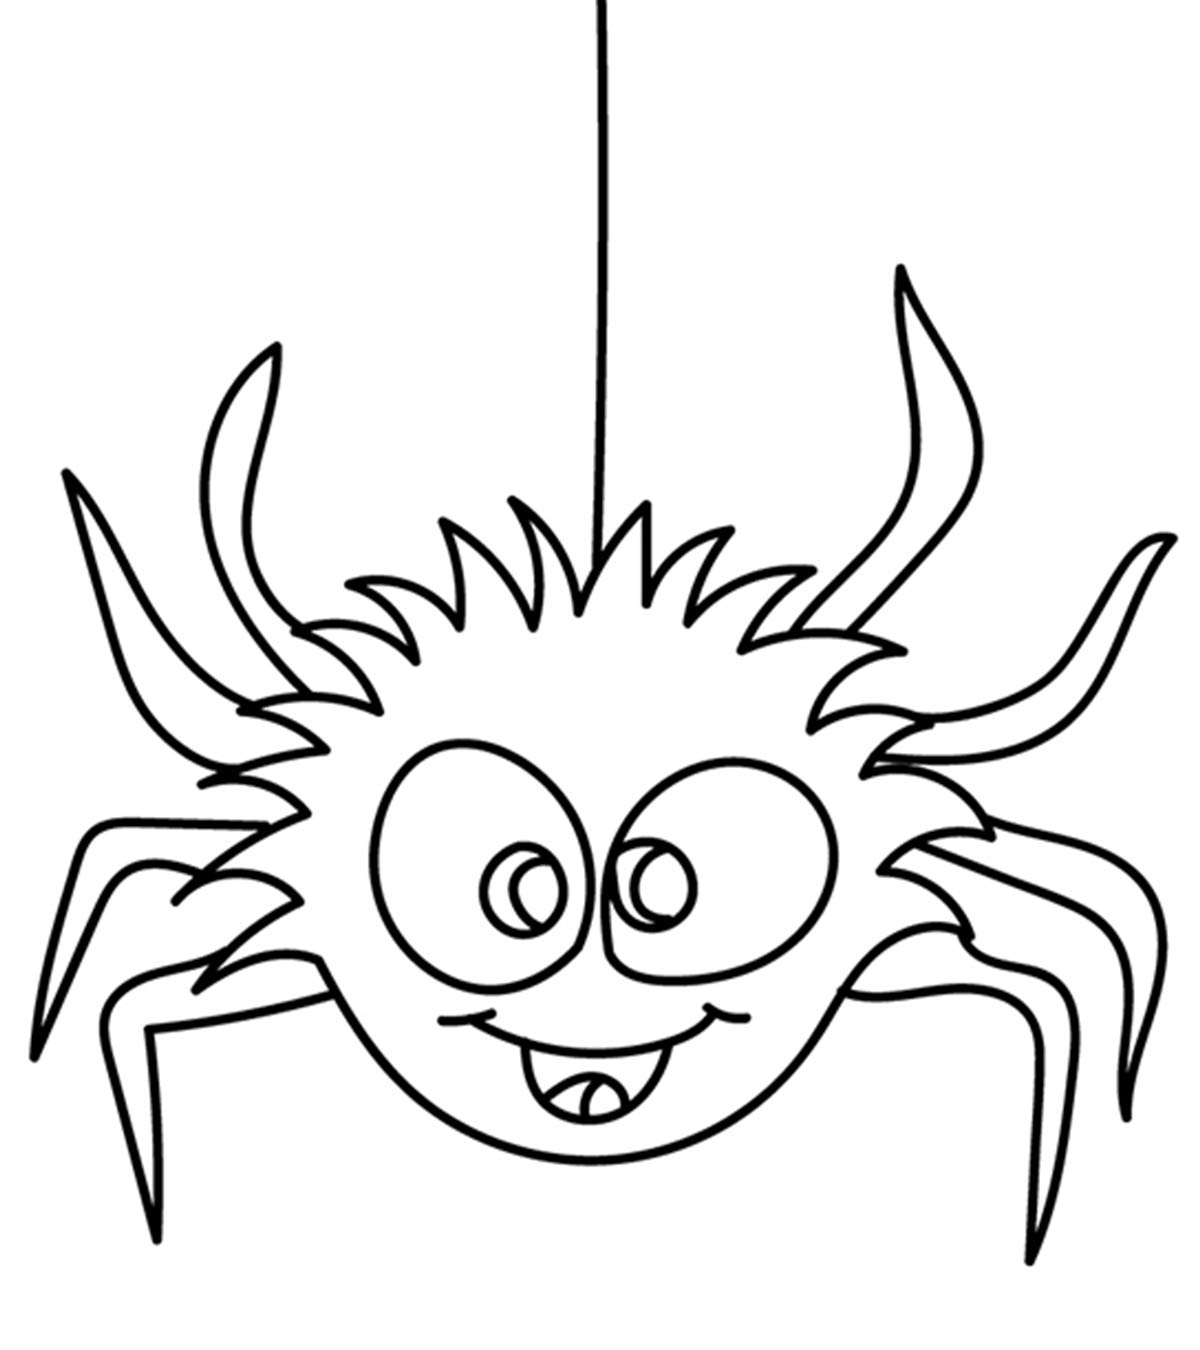 Top 10 Spider Coloring Pages Your Toddler Will Love To Color_image